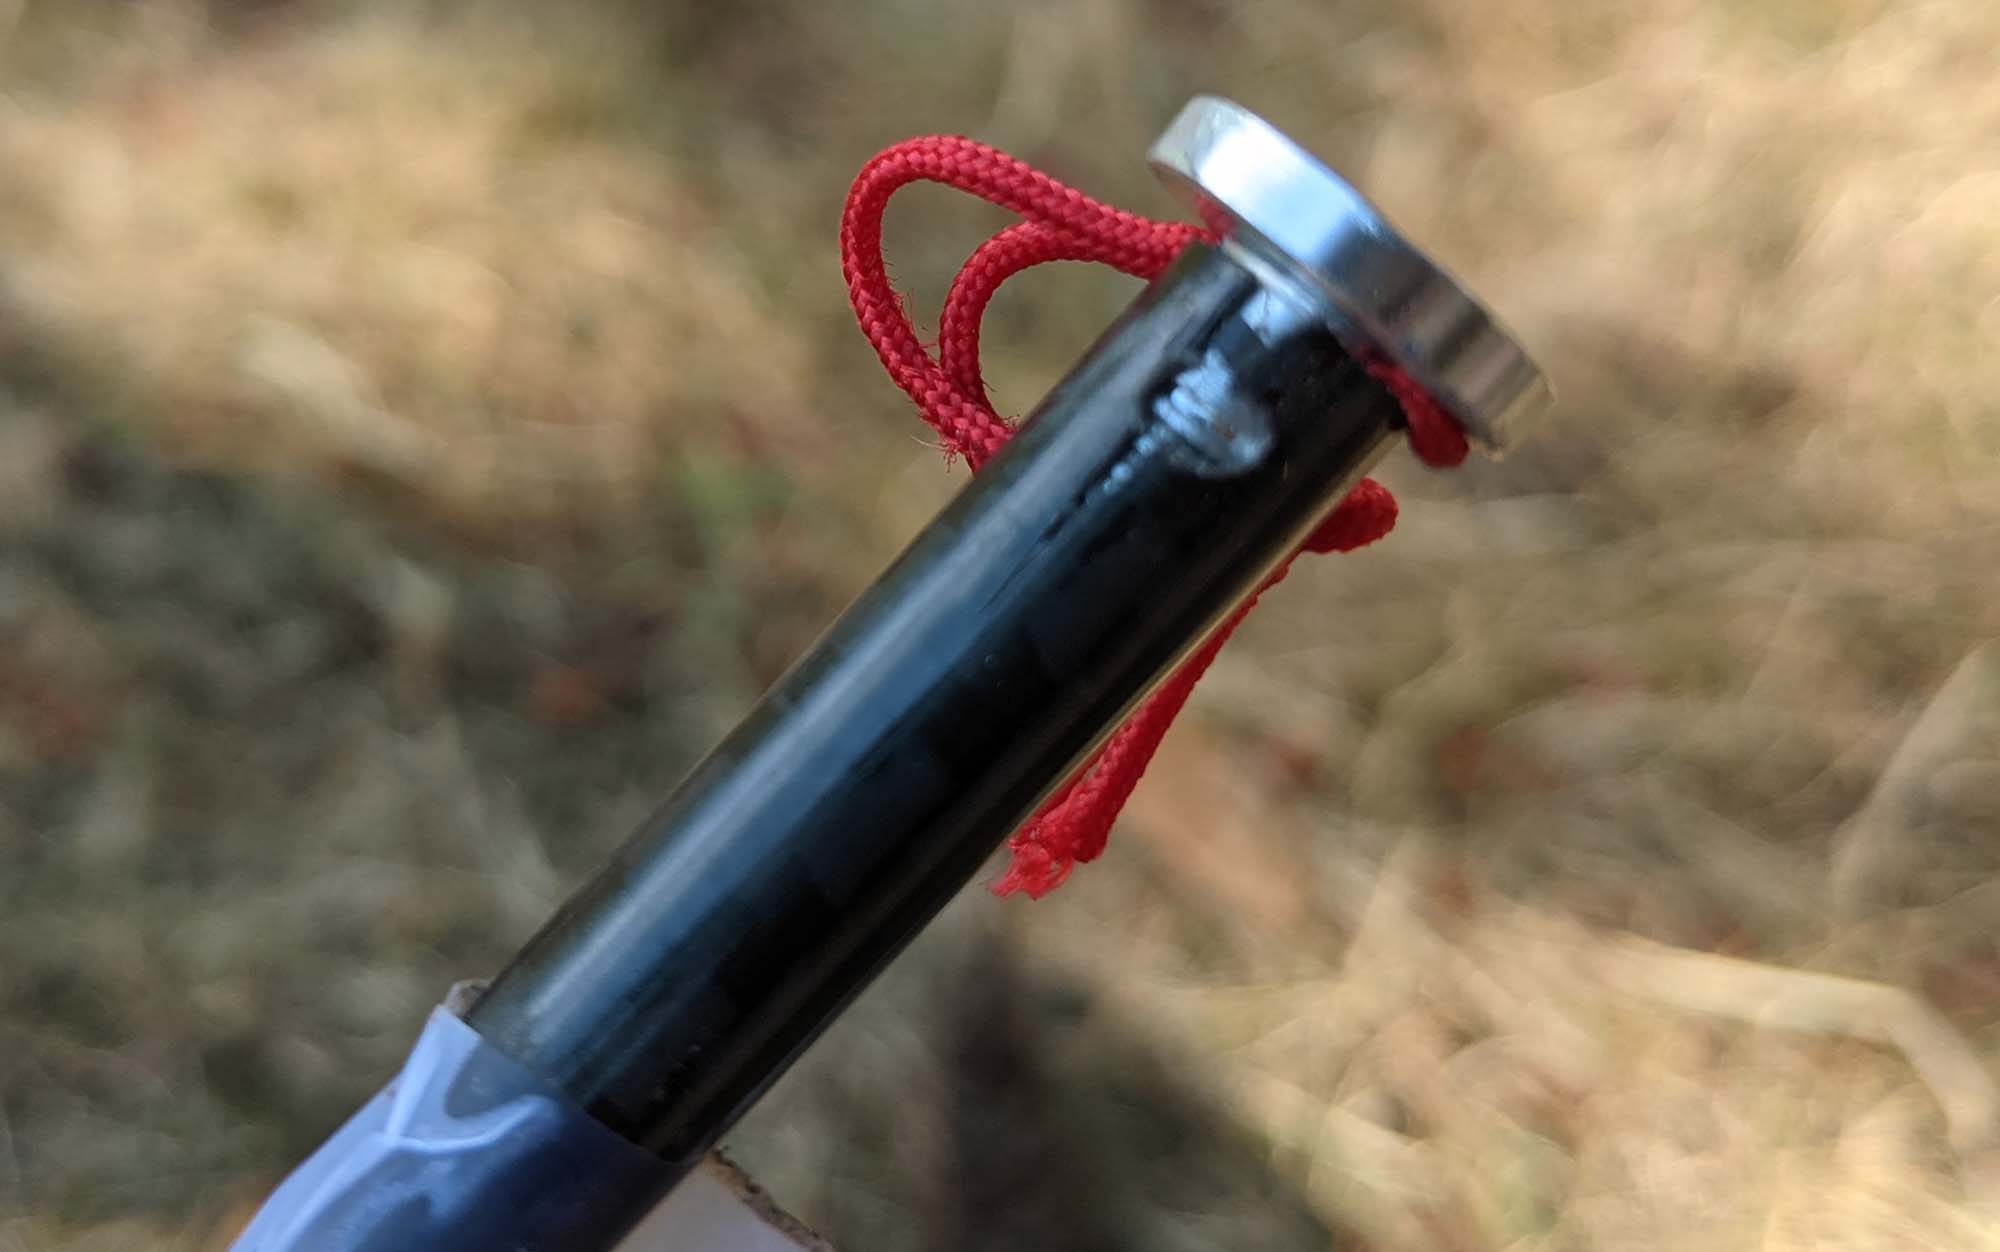 The Z packs carbon tent stake splintered during the hard ground test.